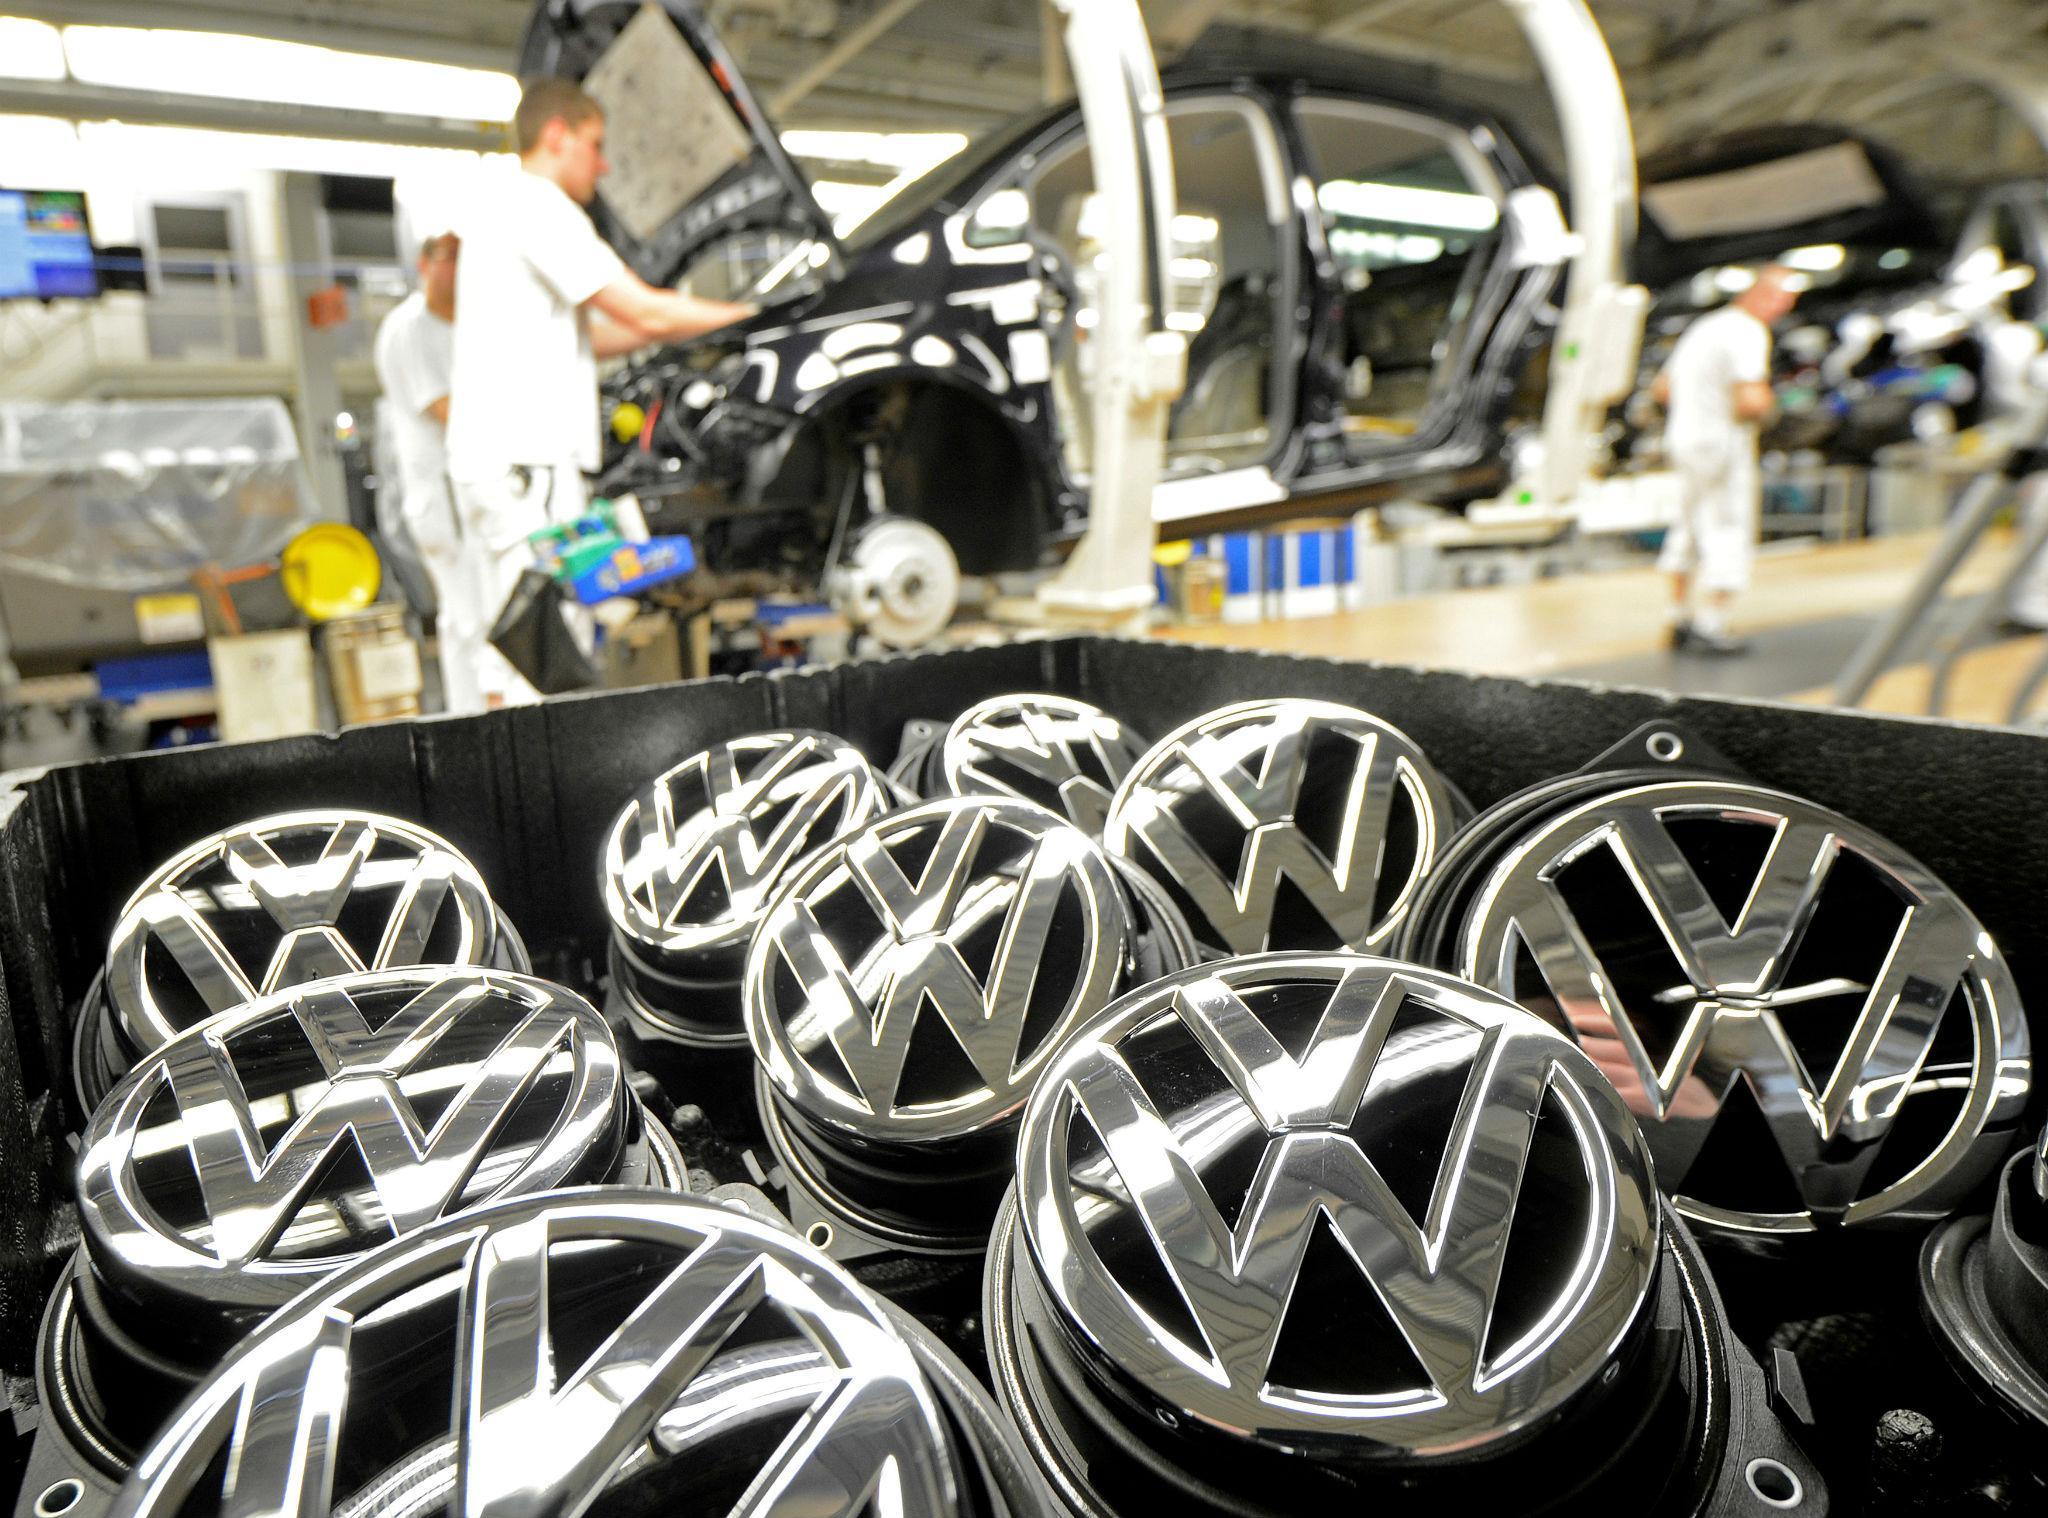 A Volkswagen production line in Wolfsburg, Germany. The company has offered to buy back affected vehicles from as many as 475,000 owners